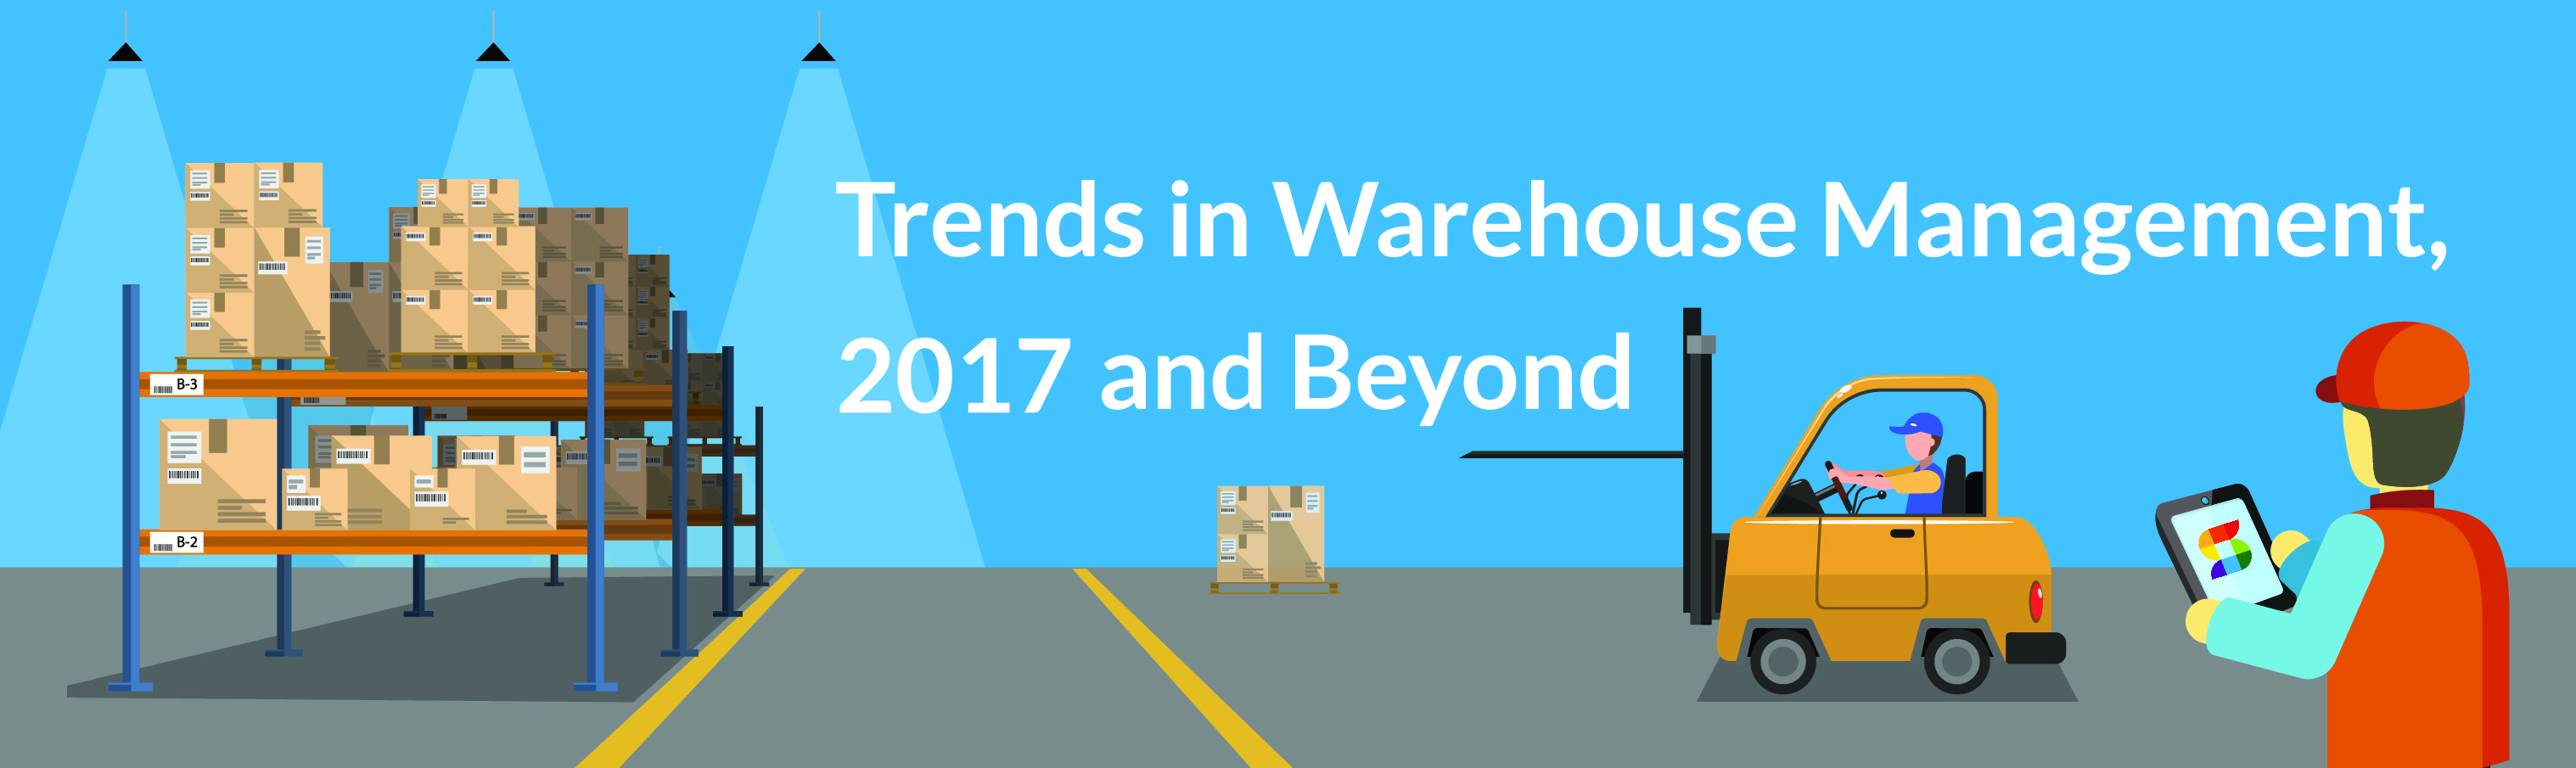 Trends in Warehouse Management, 2017 and Beyond